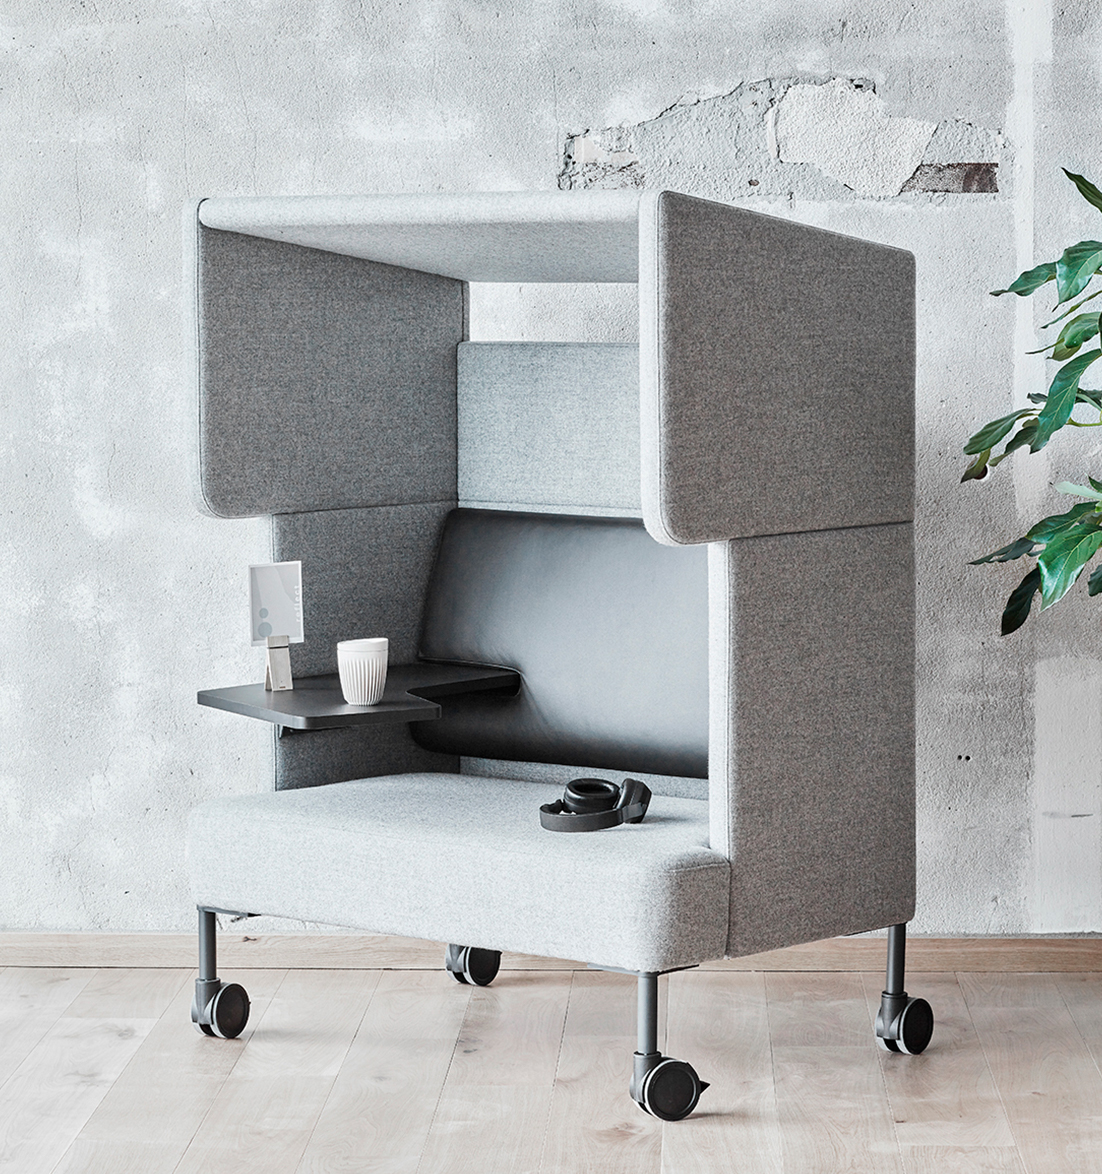 A grey office work booth with a work table and a plant.